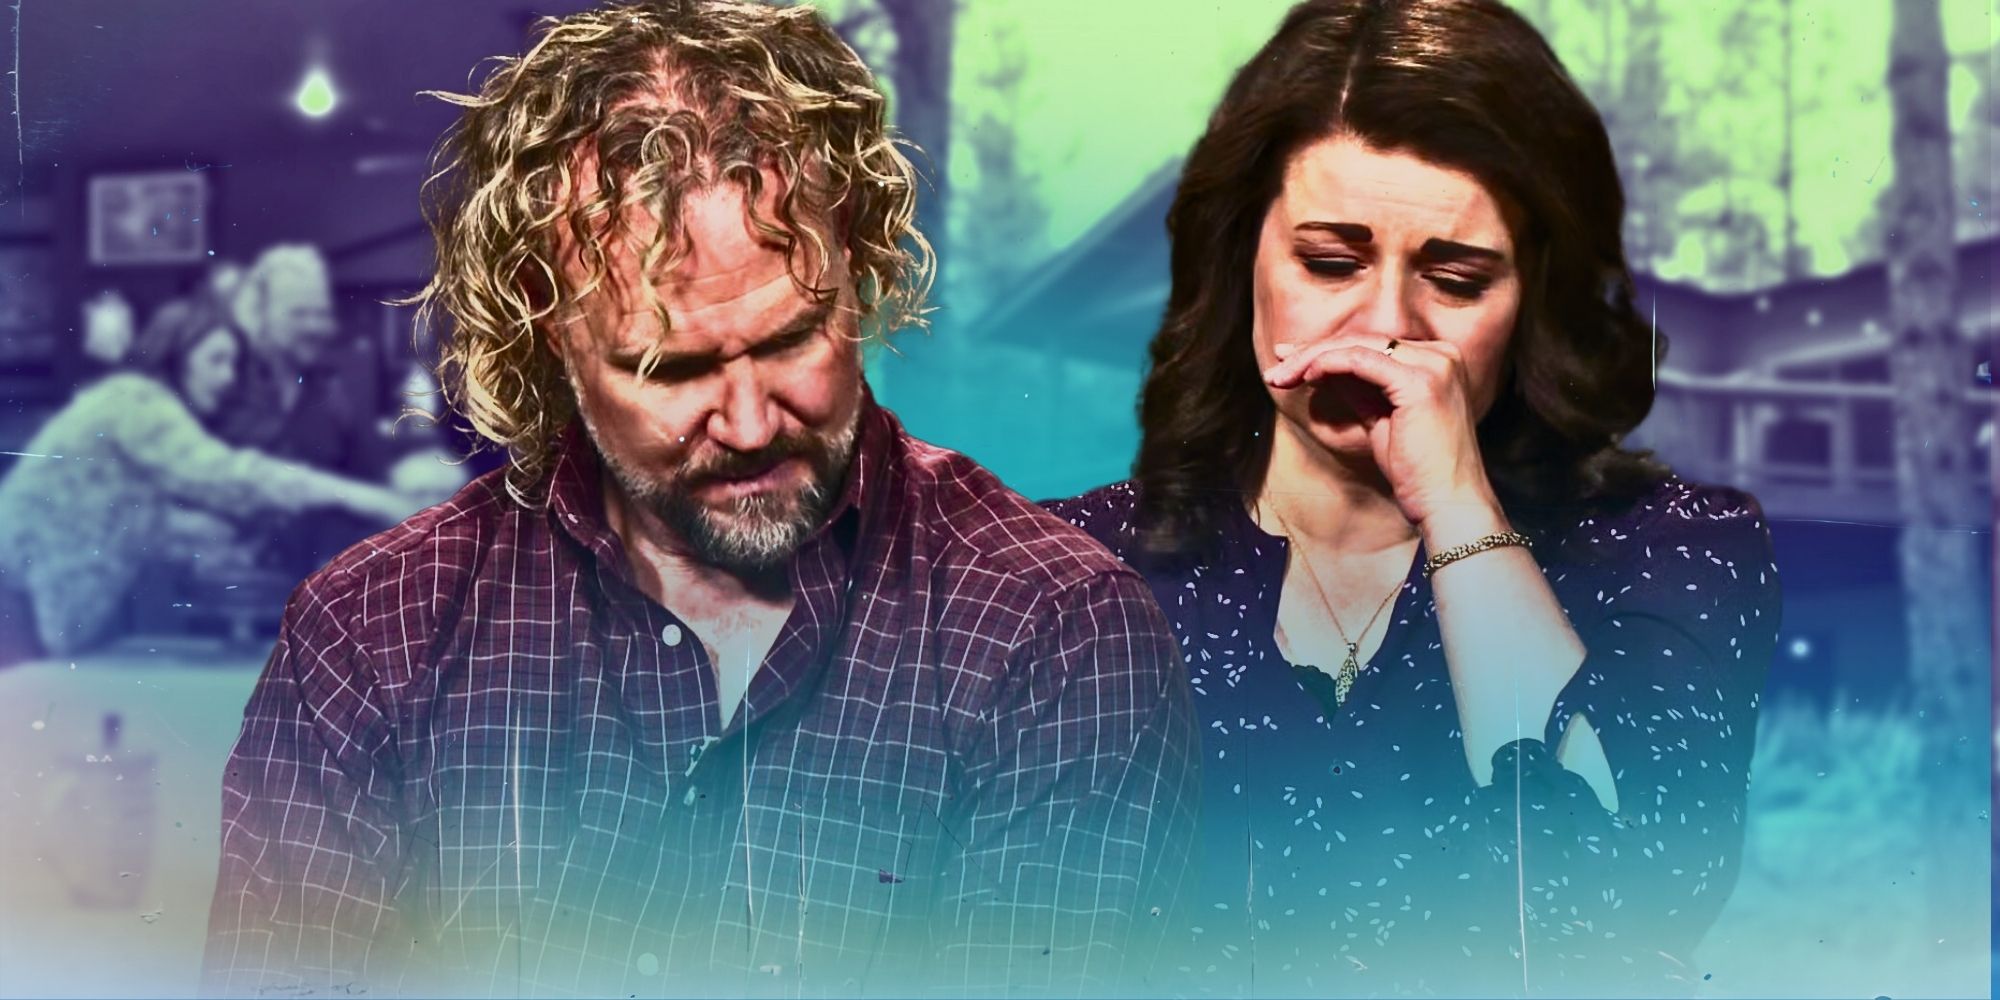 Sister Wives Star Kody Brown Seems “Disgusted” By Robyn’s Crying